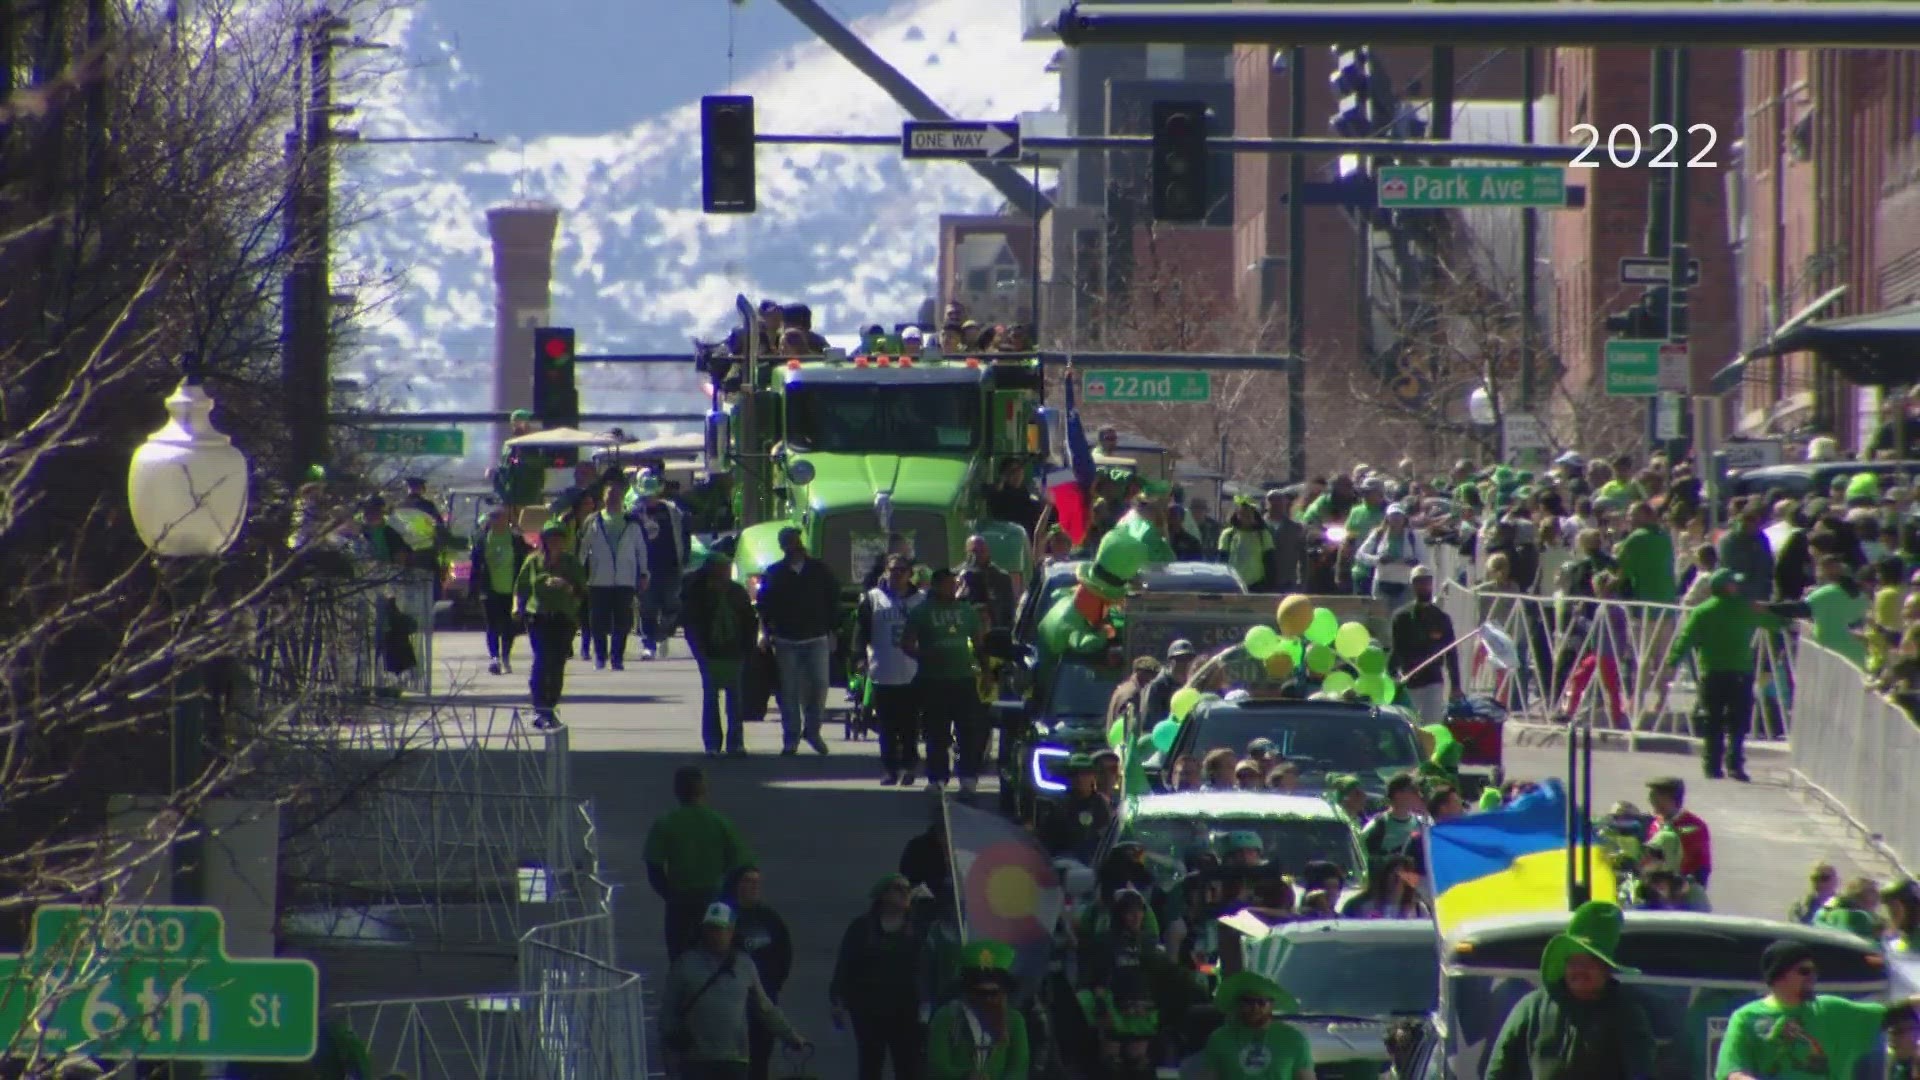 Thousands of people are expected to flood the streets of downtown Denver for the annual St. Patrick's Day parade.